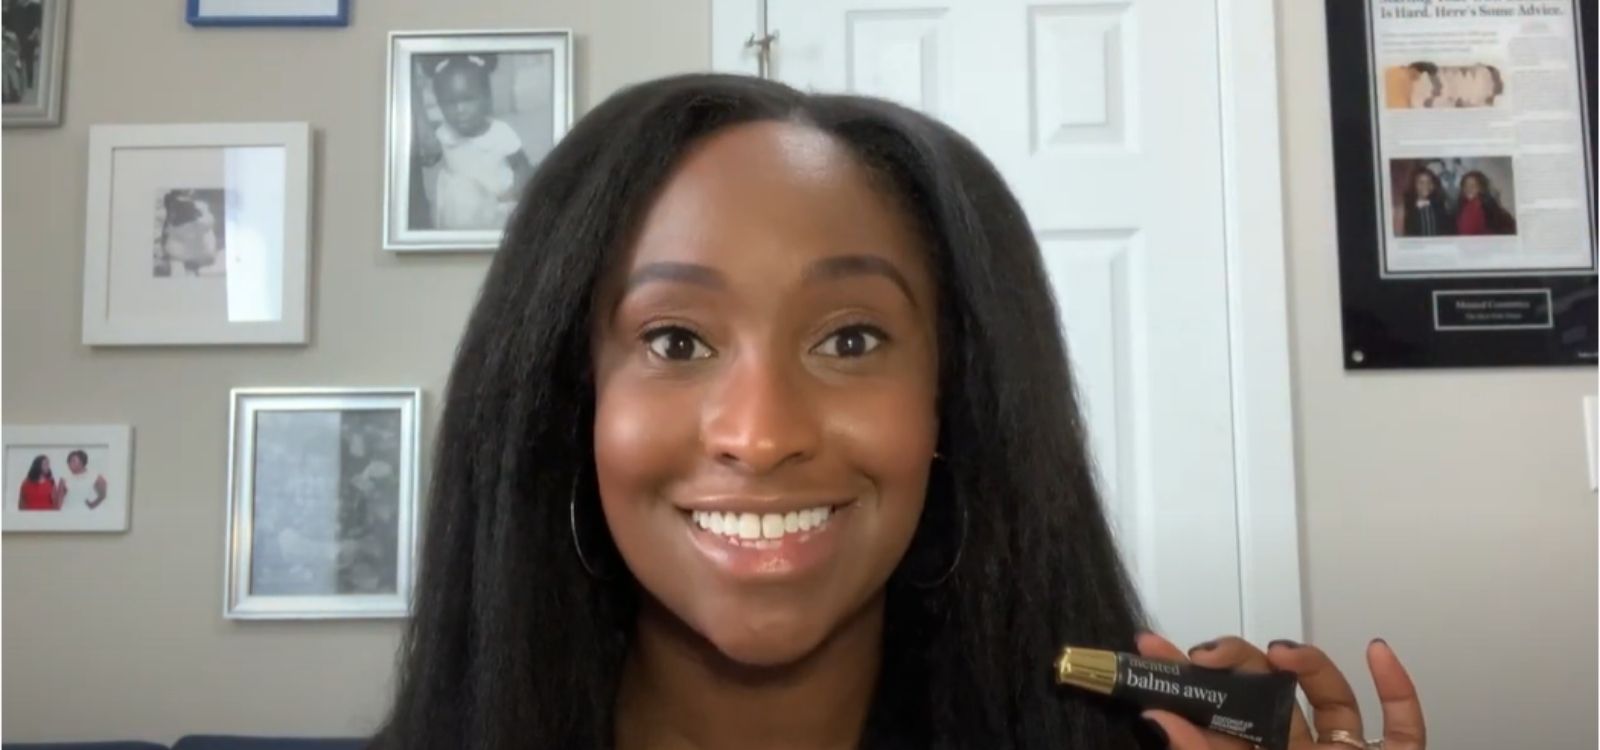 Co-Founder and CEO KJ Miller Shows You Our NEW Balms Away Lip Balm!